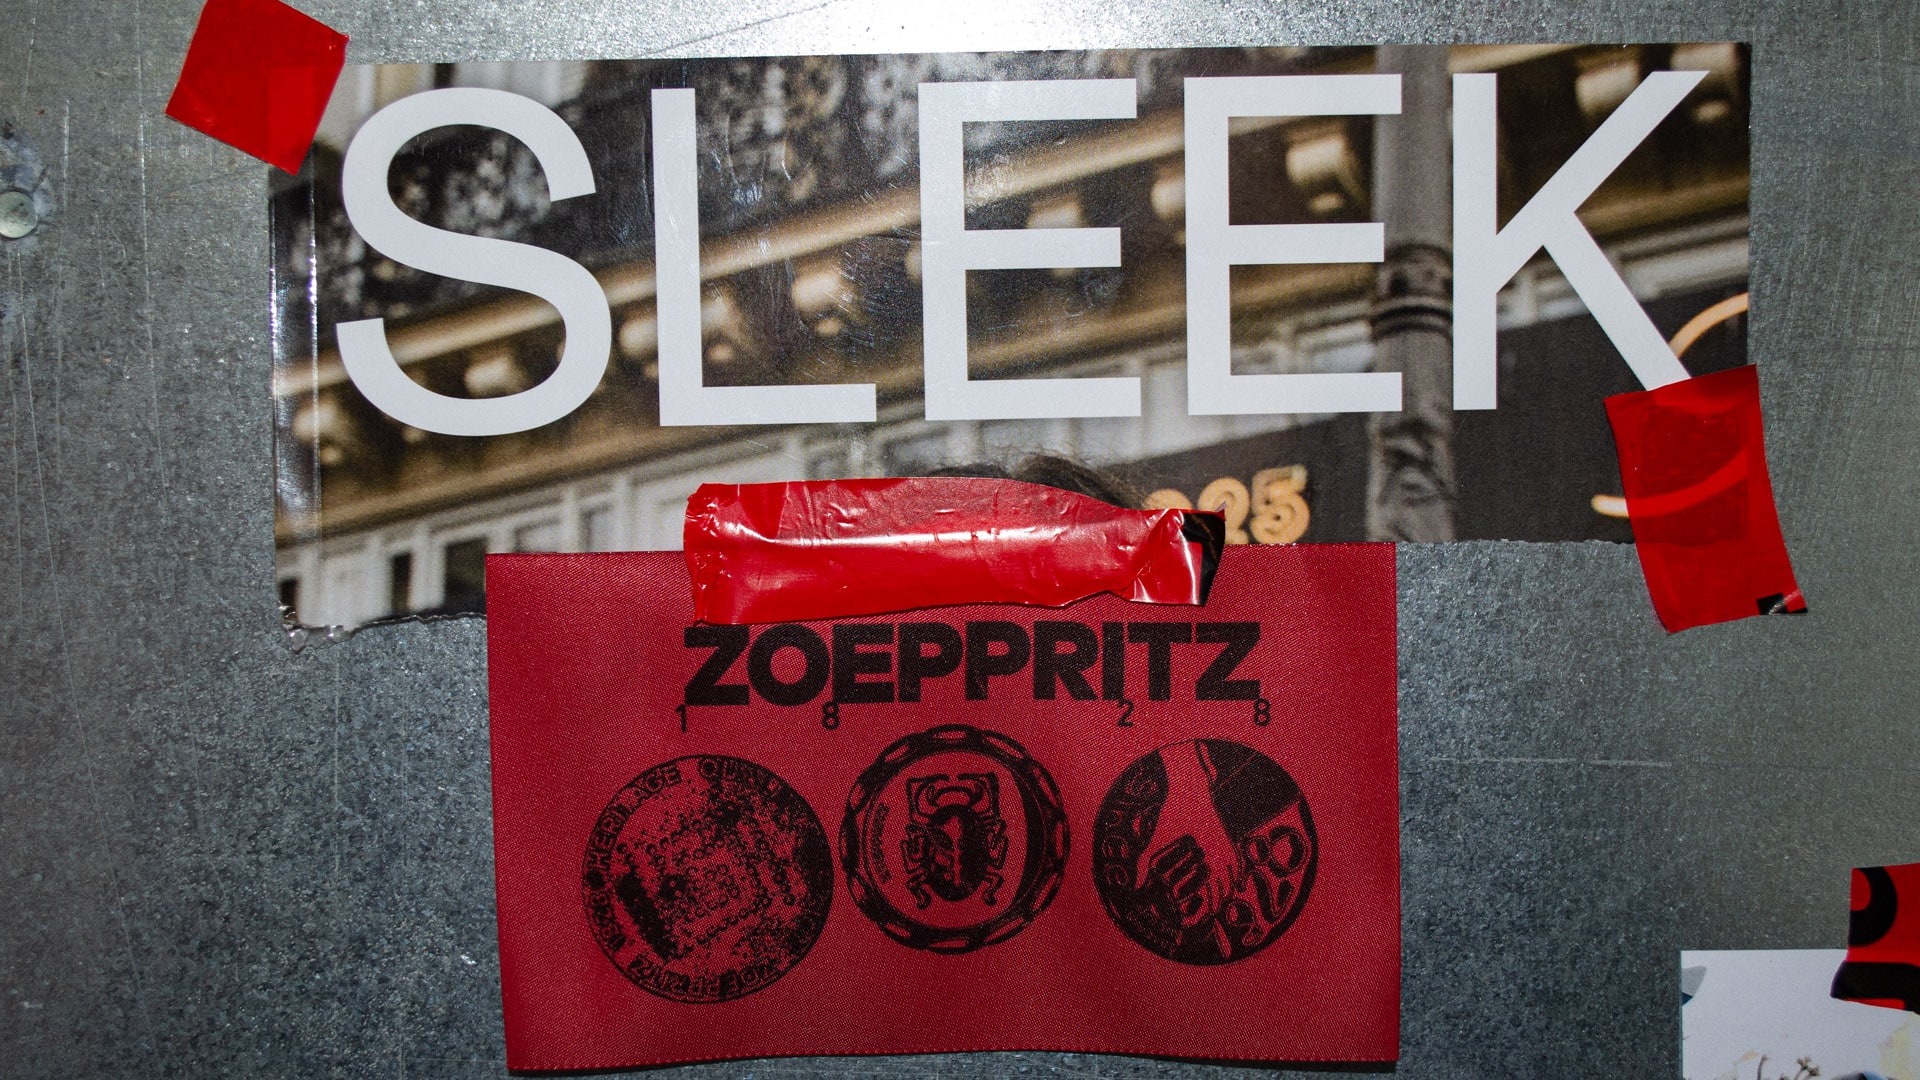 ZOEPPRITZ1828 collaborates together with SLEEK on a limited edition of high-quality interior design textiles. Expanding our creative vision together, we are proud to announce the collaboration with Germany´s leading independent media house for creativity and innovation located in Berlin.